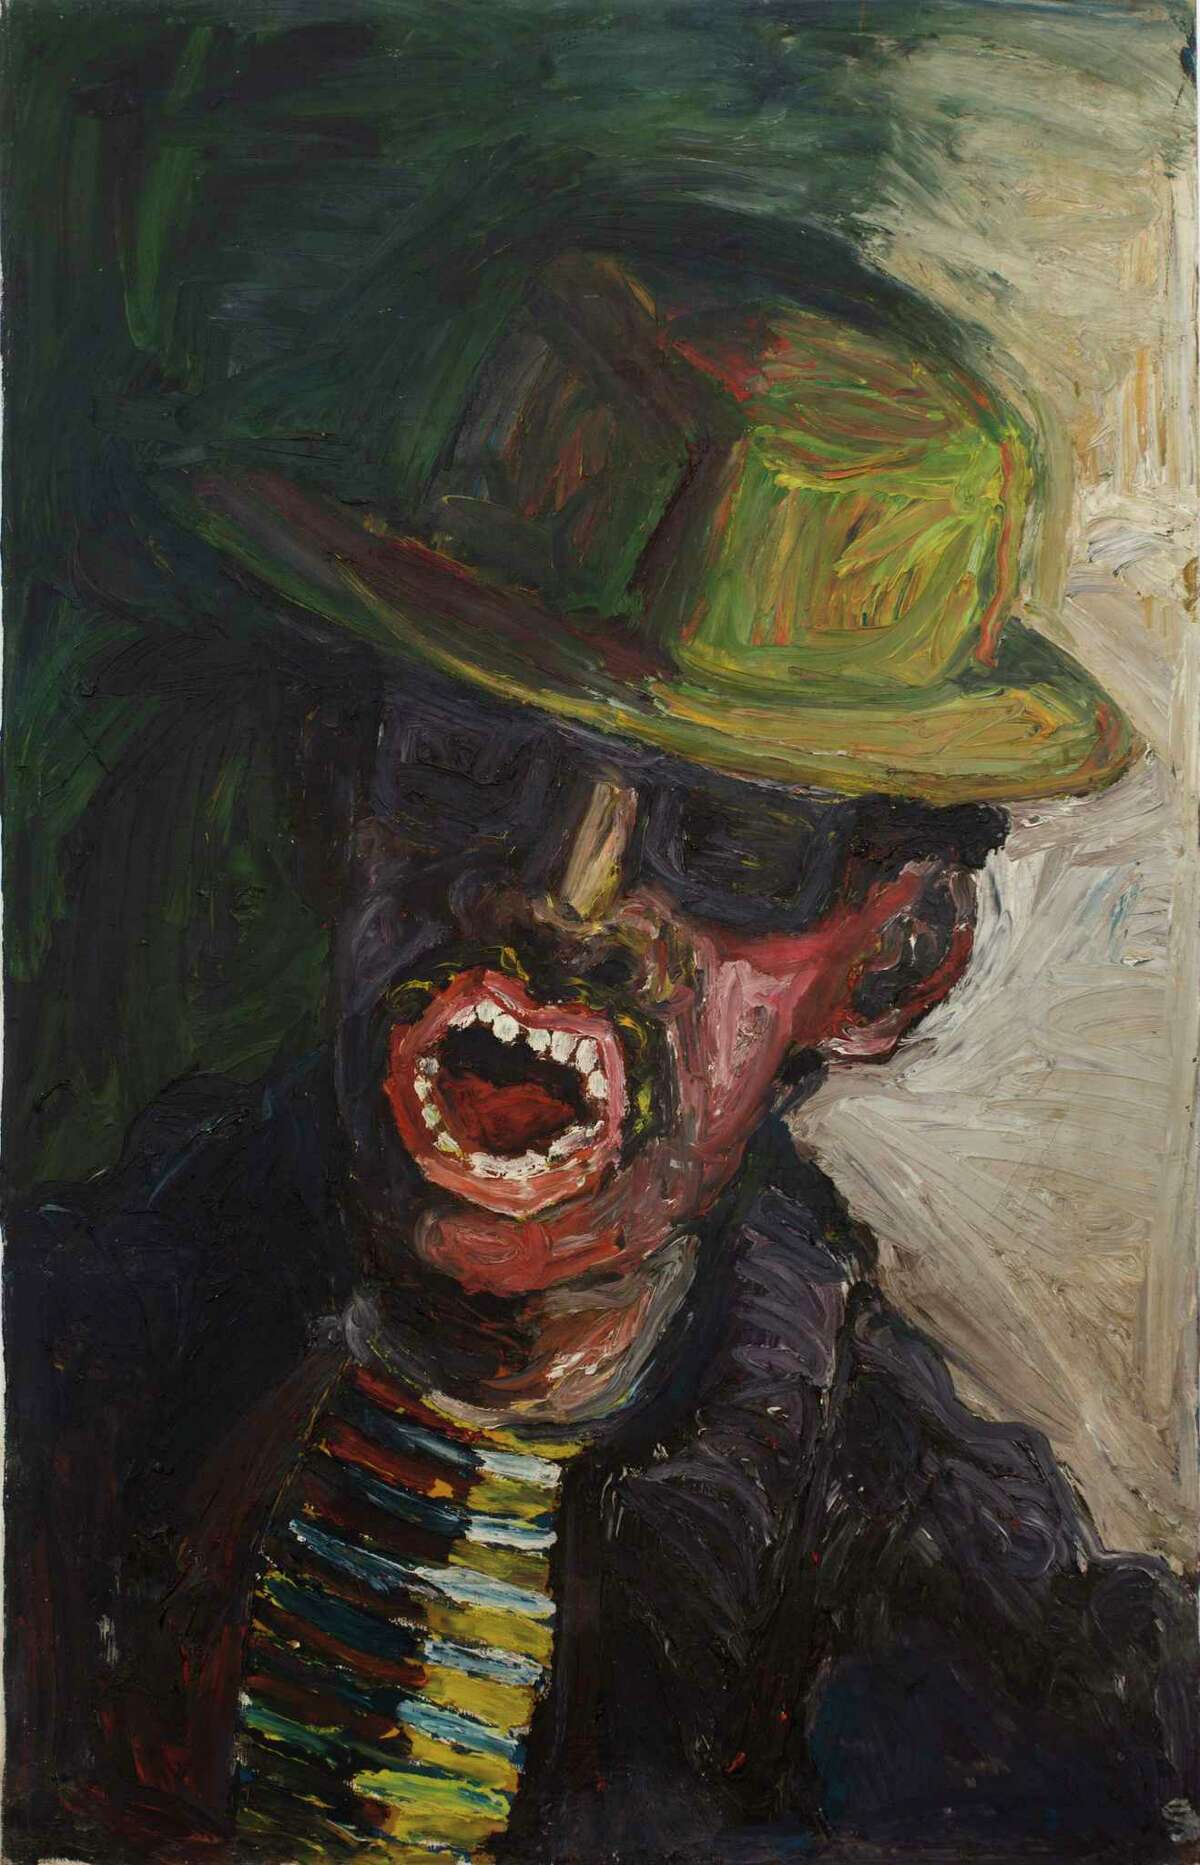 Mike Henderson, “Self Portrait,” 1966. Acrylic on canvas, 45 × 29 inches. Collection of John and Gina Wasson.